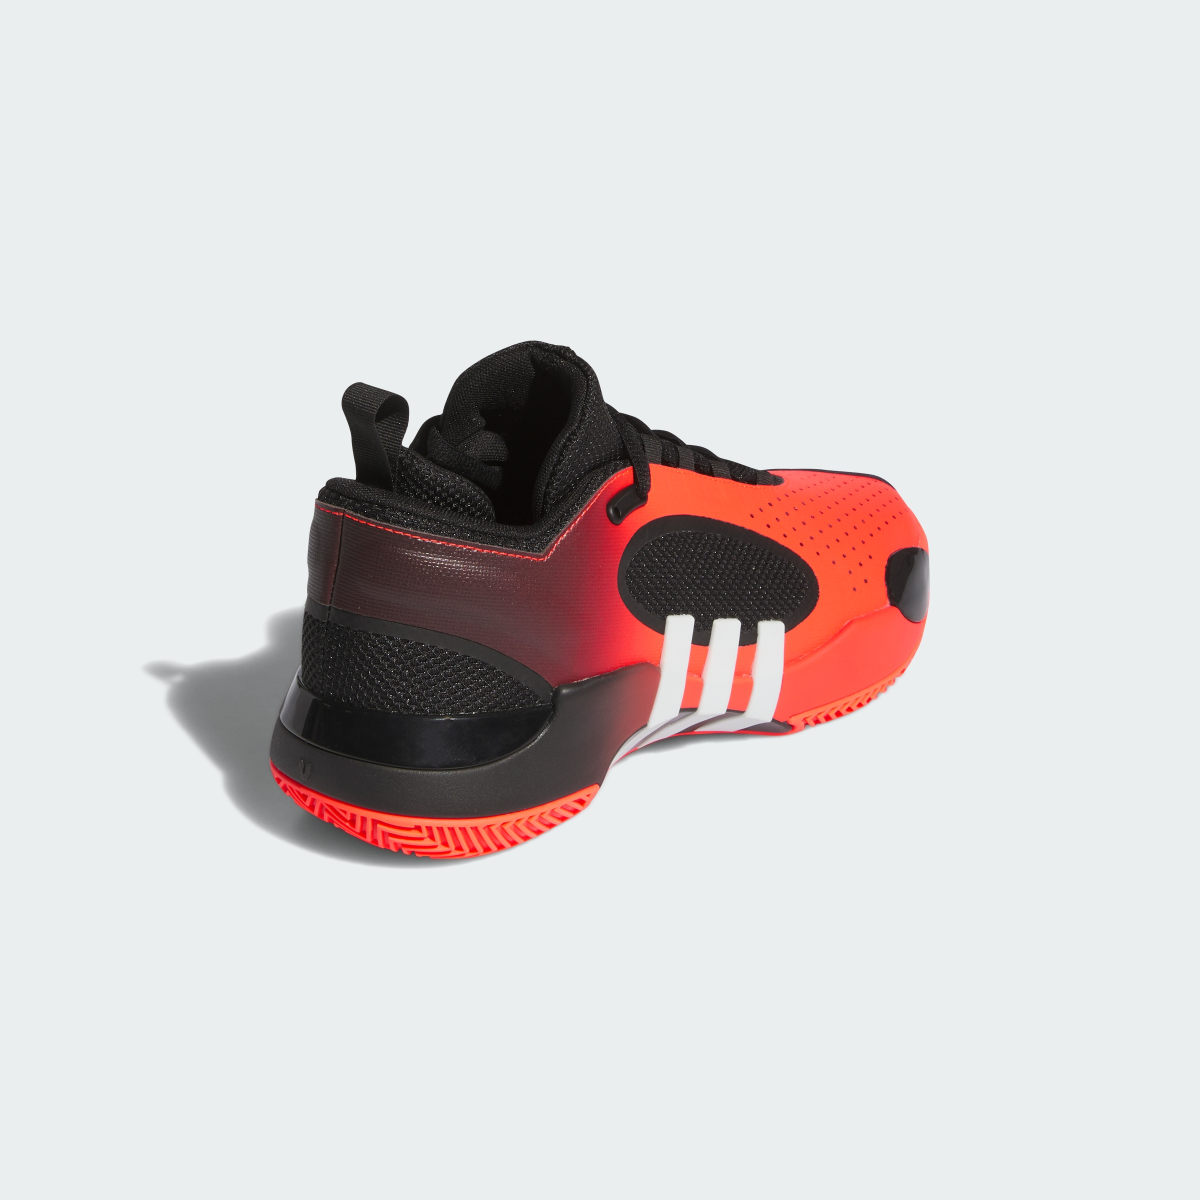 Adidas D.O.N. Issue 5 Shoes. 6